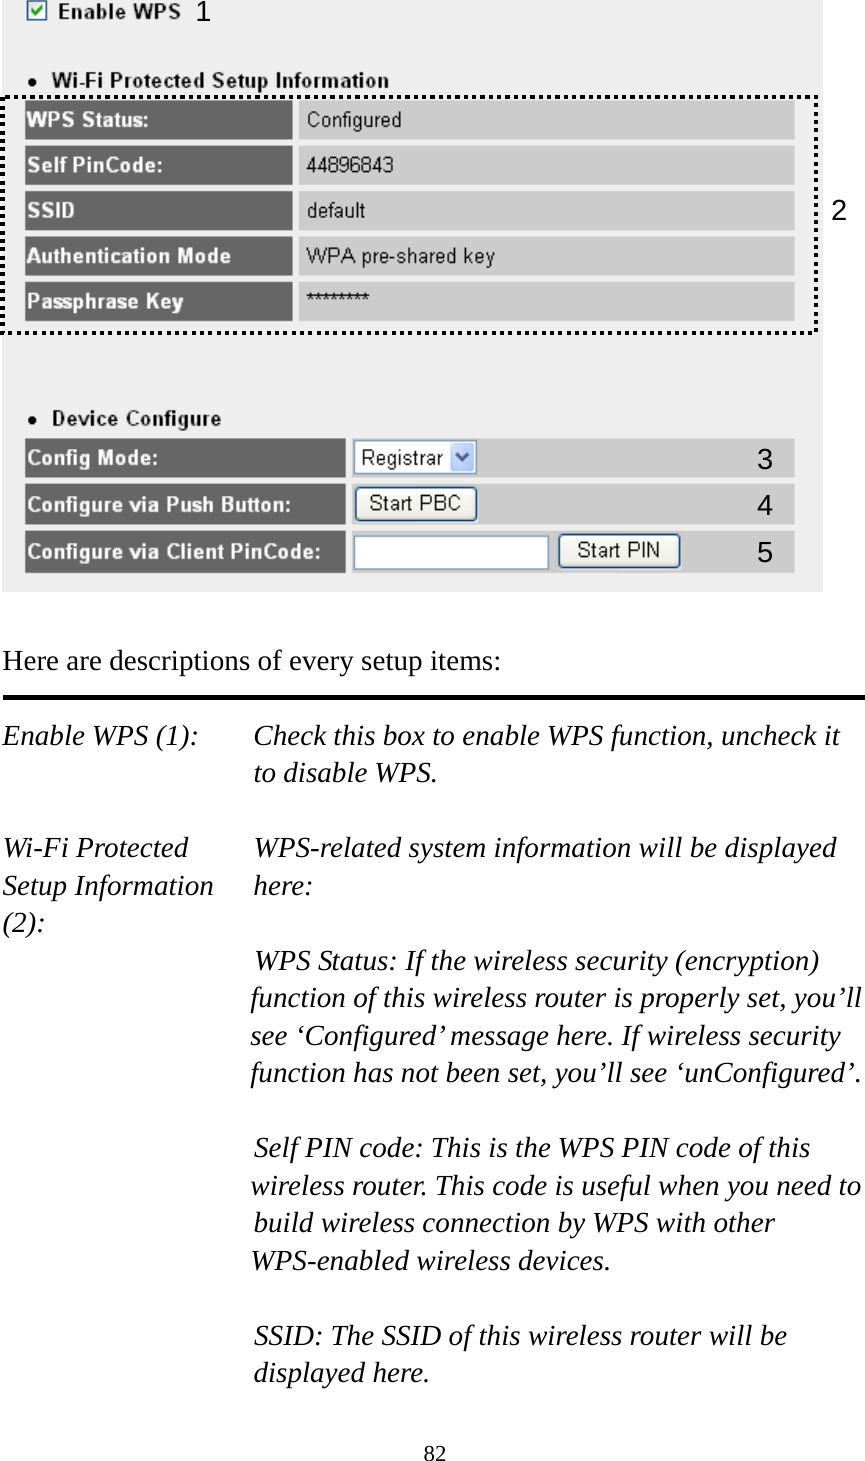 82   Here are descriptions of every setup items:  Enable WPS (1):  Check this box to enable WPS function, uncheck it to disable WPS.  Wi-Fi Protected    WPS-related system information will be displayed   Setup Information  here: (2): WPS Status: If the wireless security (encryption) function of this wireless router is properly set, you’ll see ‘Configured’ message here. If wireless security function has not been set, you’ll see ‘unConfigured’.  Self PIN code: This is the WPS PIN code of this wireless router. This code is useful when you need to  build wireless connection by WPS with other WPS-enabled wireless devices.  SSID: The SSID of this wireless router will be displayed here. 1 3 4 25 